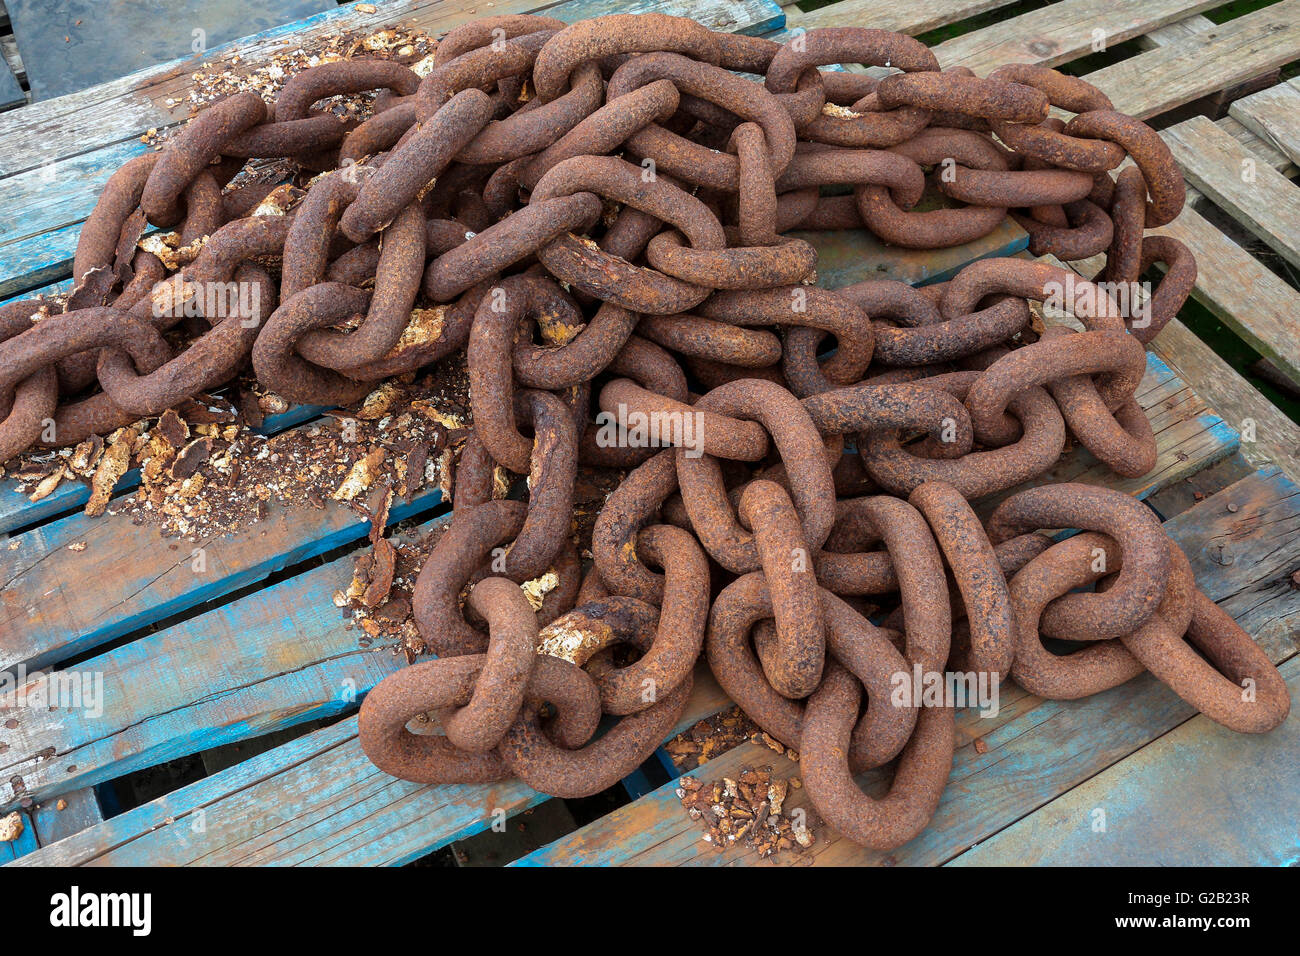 Industry - Pile of rusty old chains Stock Photo